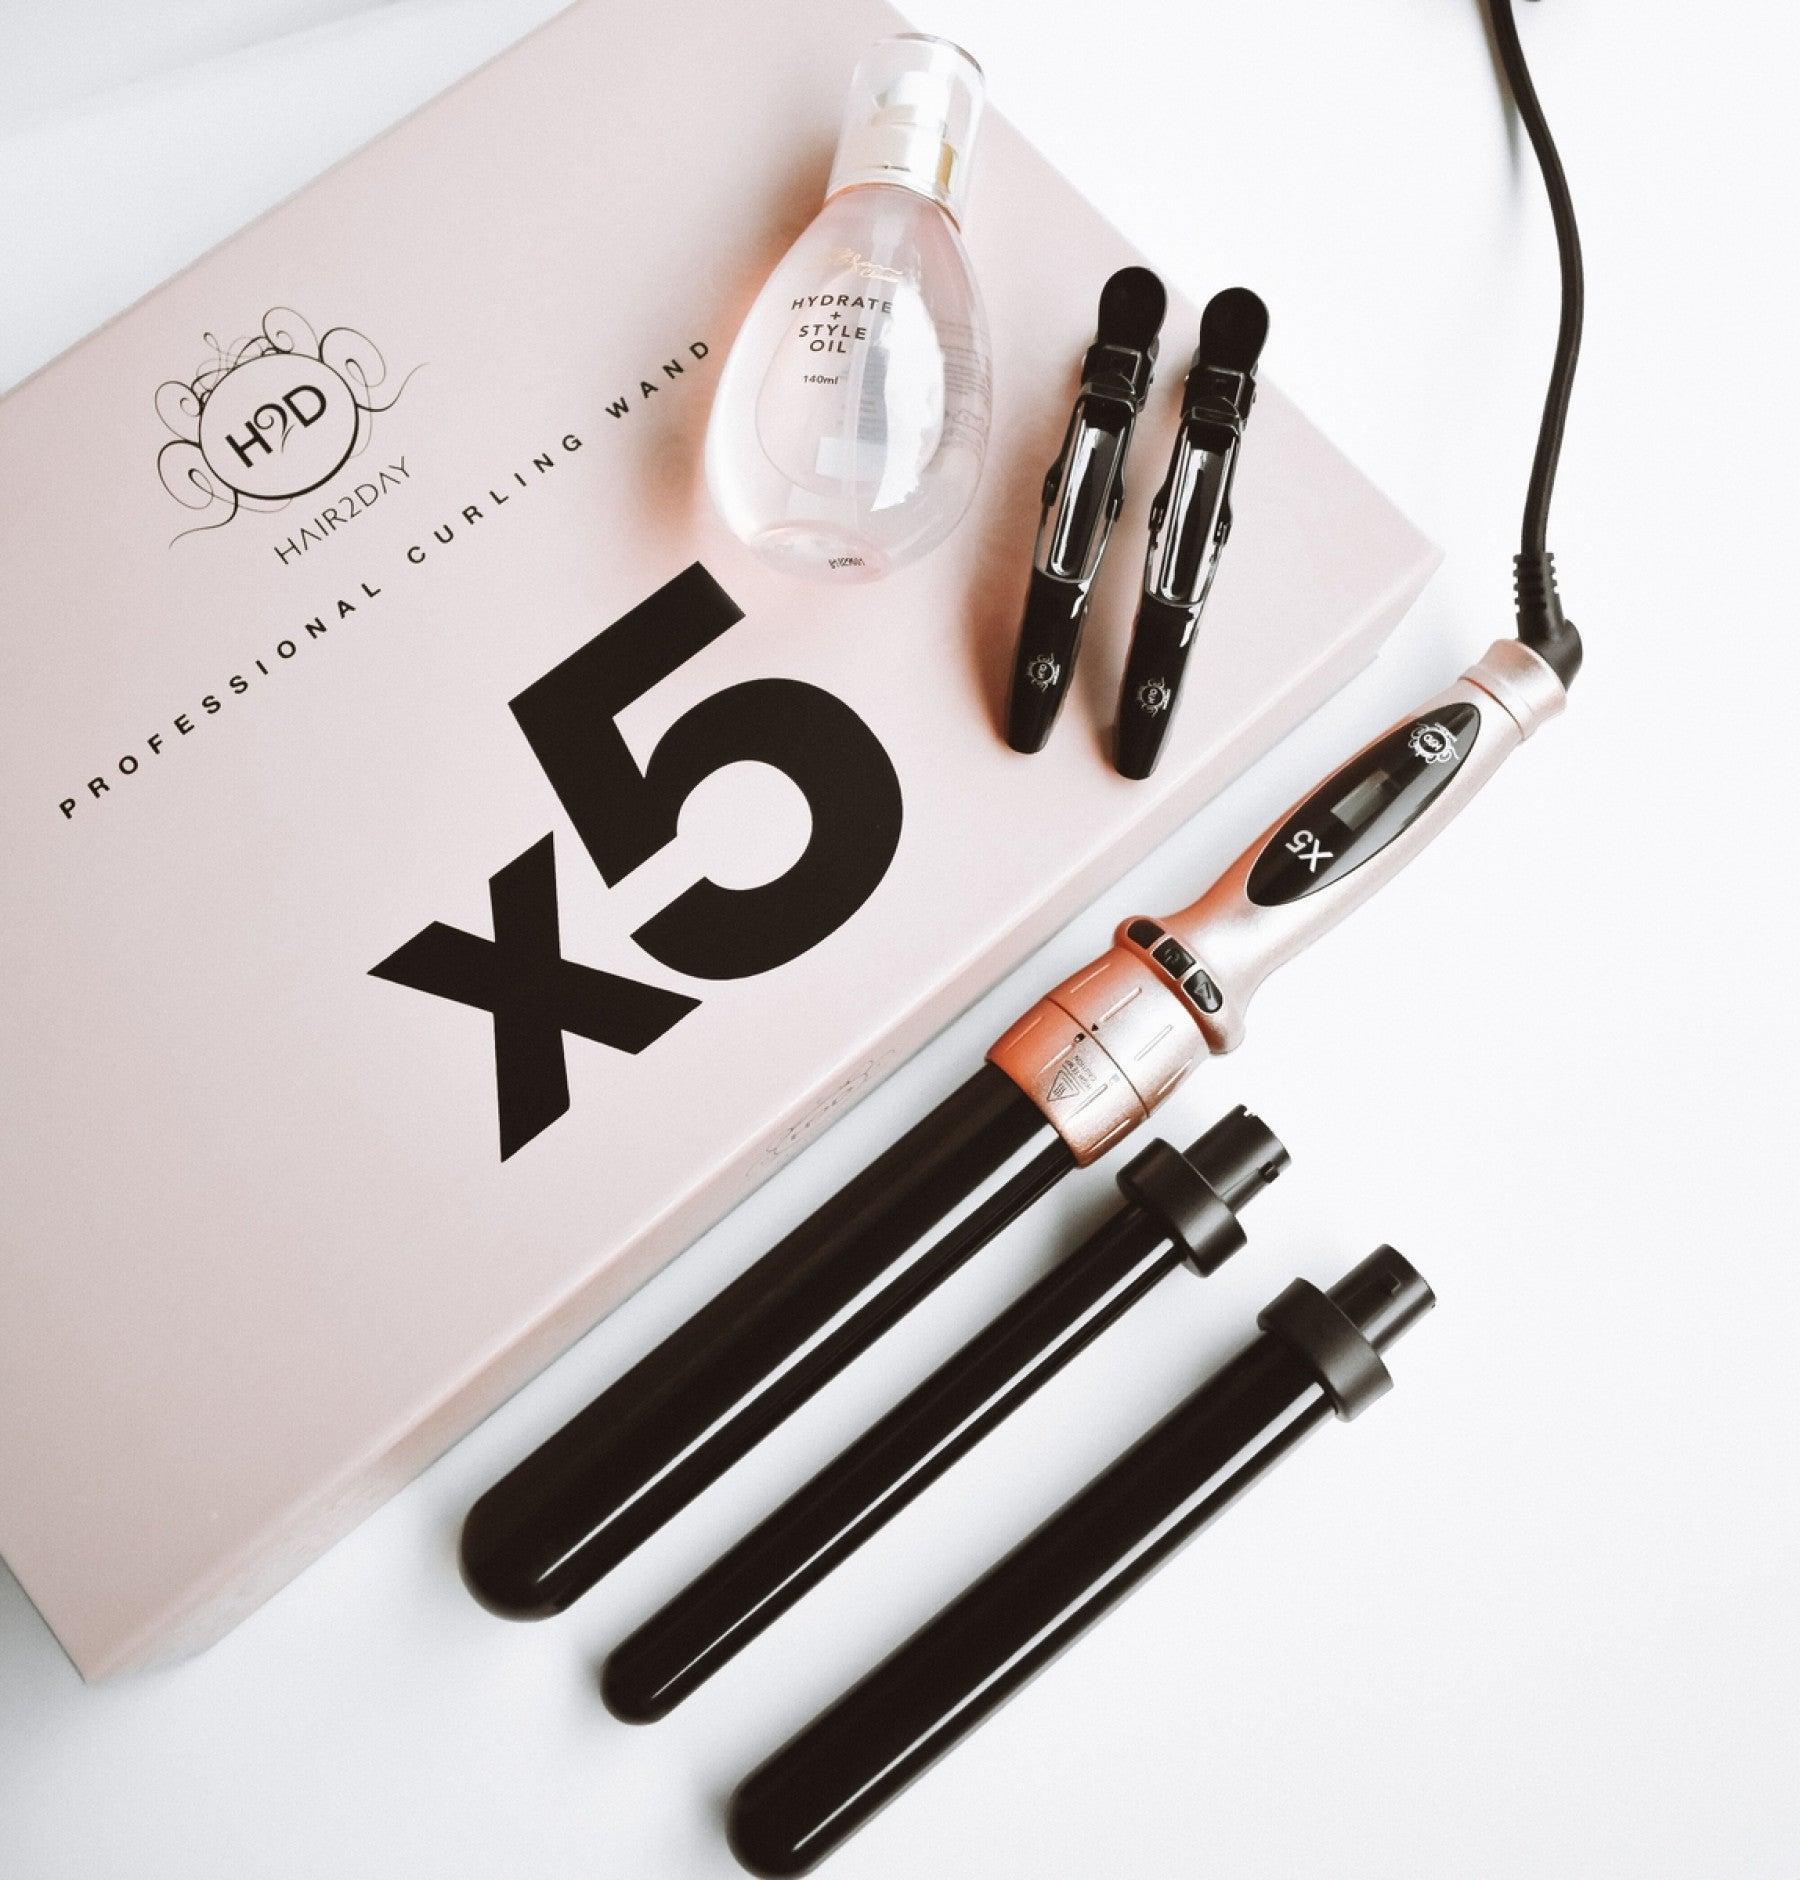 H2D Rose Gold Professional Haircare X5 Curling Wand Shiny and durable curls, only with this reliable and professional device